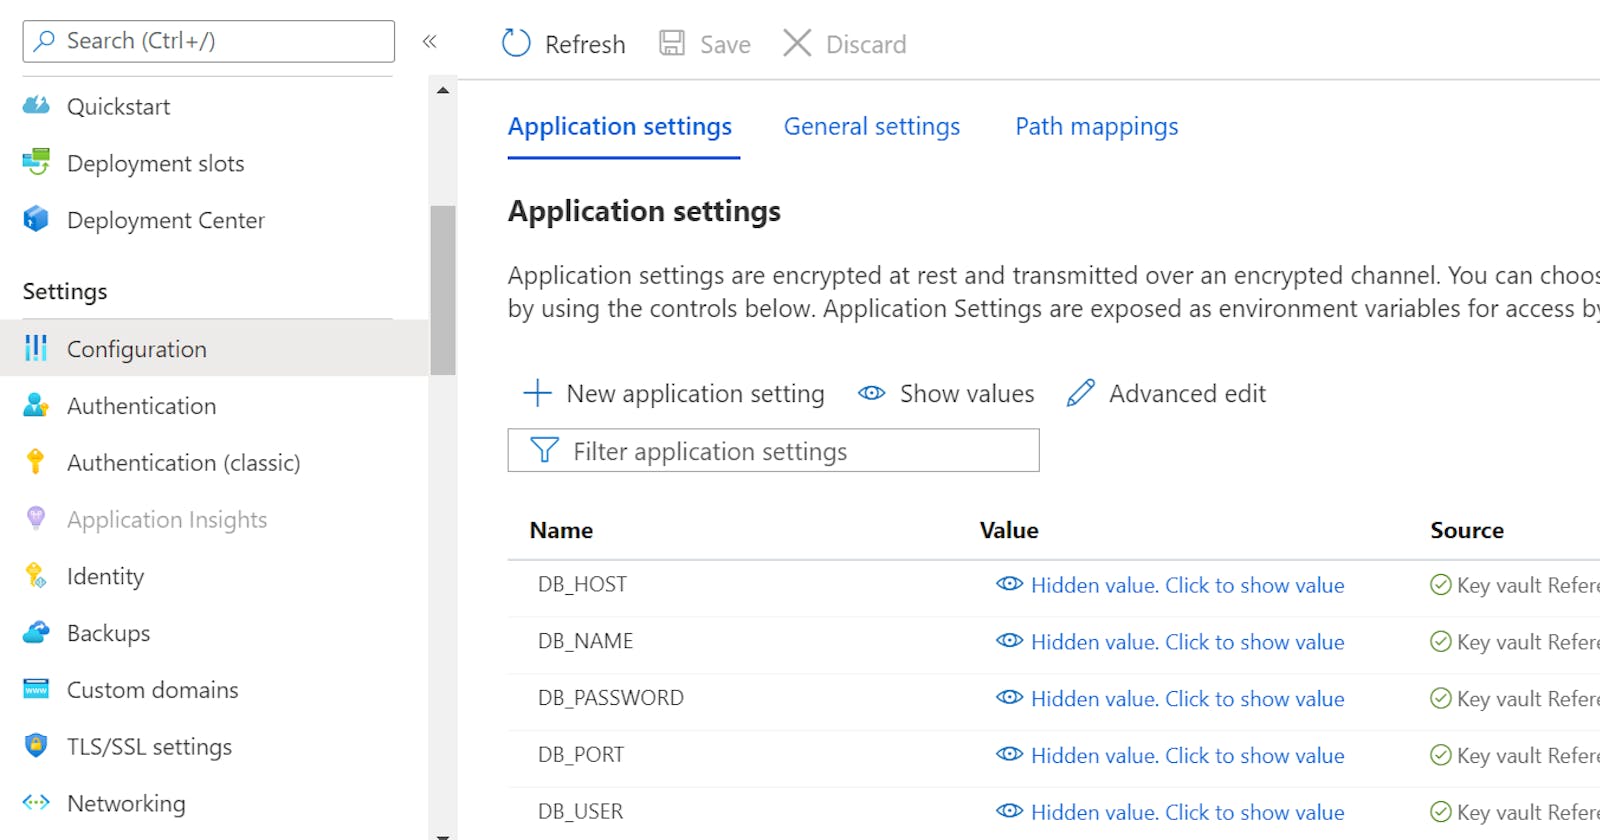 Securing App Service Application Settings with Azure Key Vault Reference